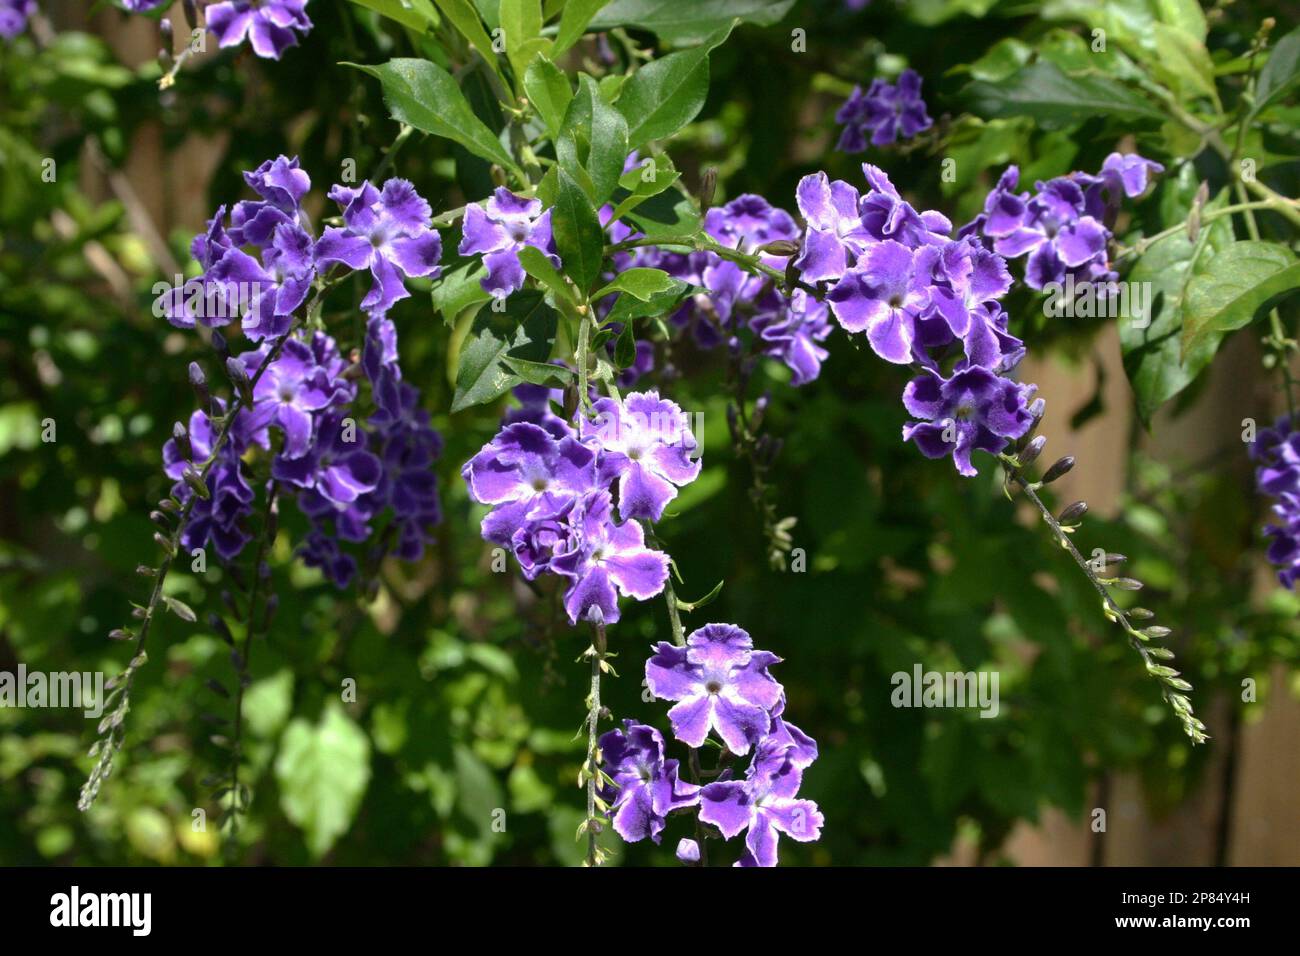 CLOSE-UP OF THE FLOWERS OF THE PLANT 'GEISHA GIRL' (DURANTA REPENS) Stock Photo